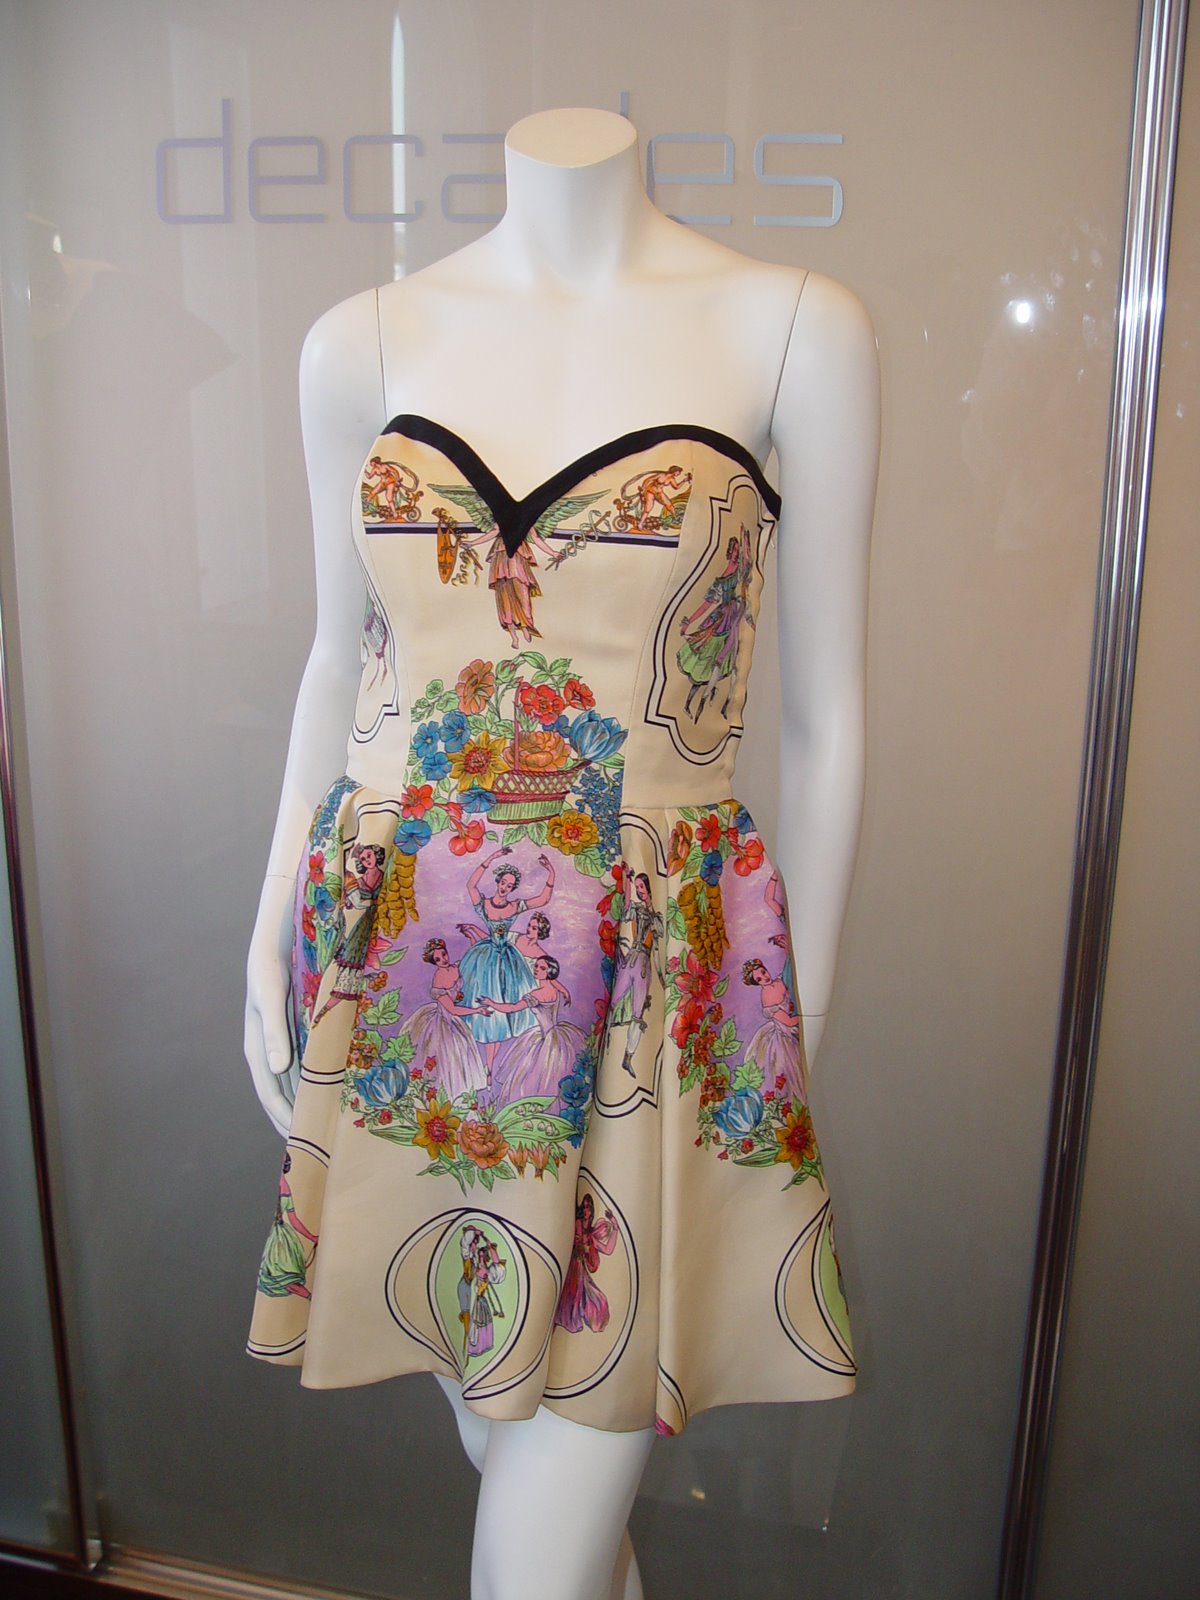 [GIANNI+VERSACE+EARLY+90S+SCARF+PRINT+STRAPLESS+BUSTIER+DRESS+MARKED+SIZE+42.JPG.JPG]